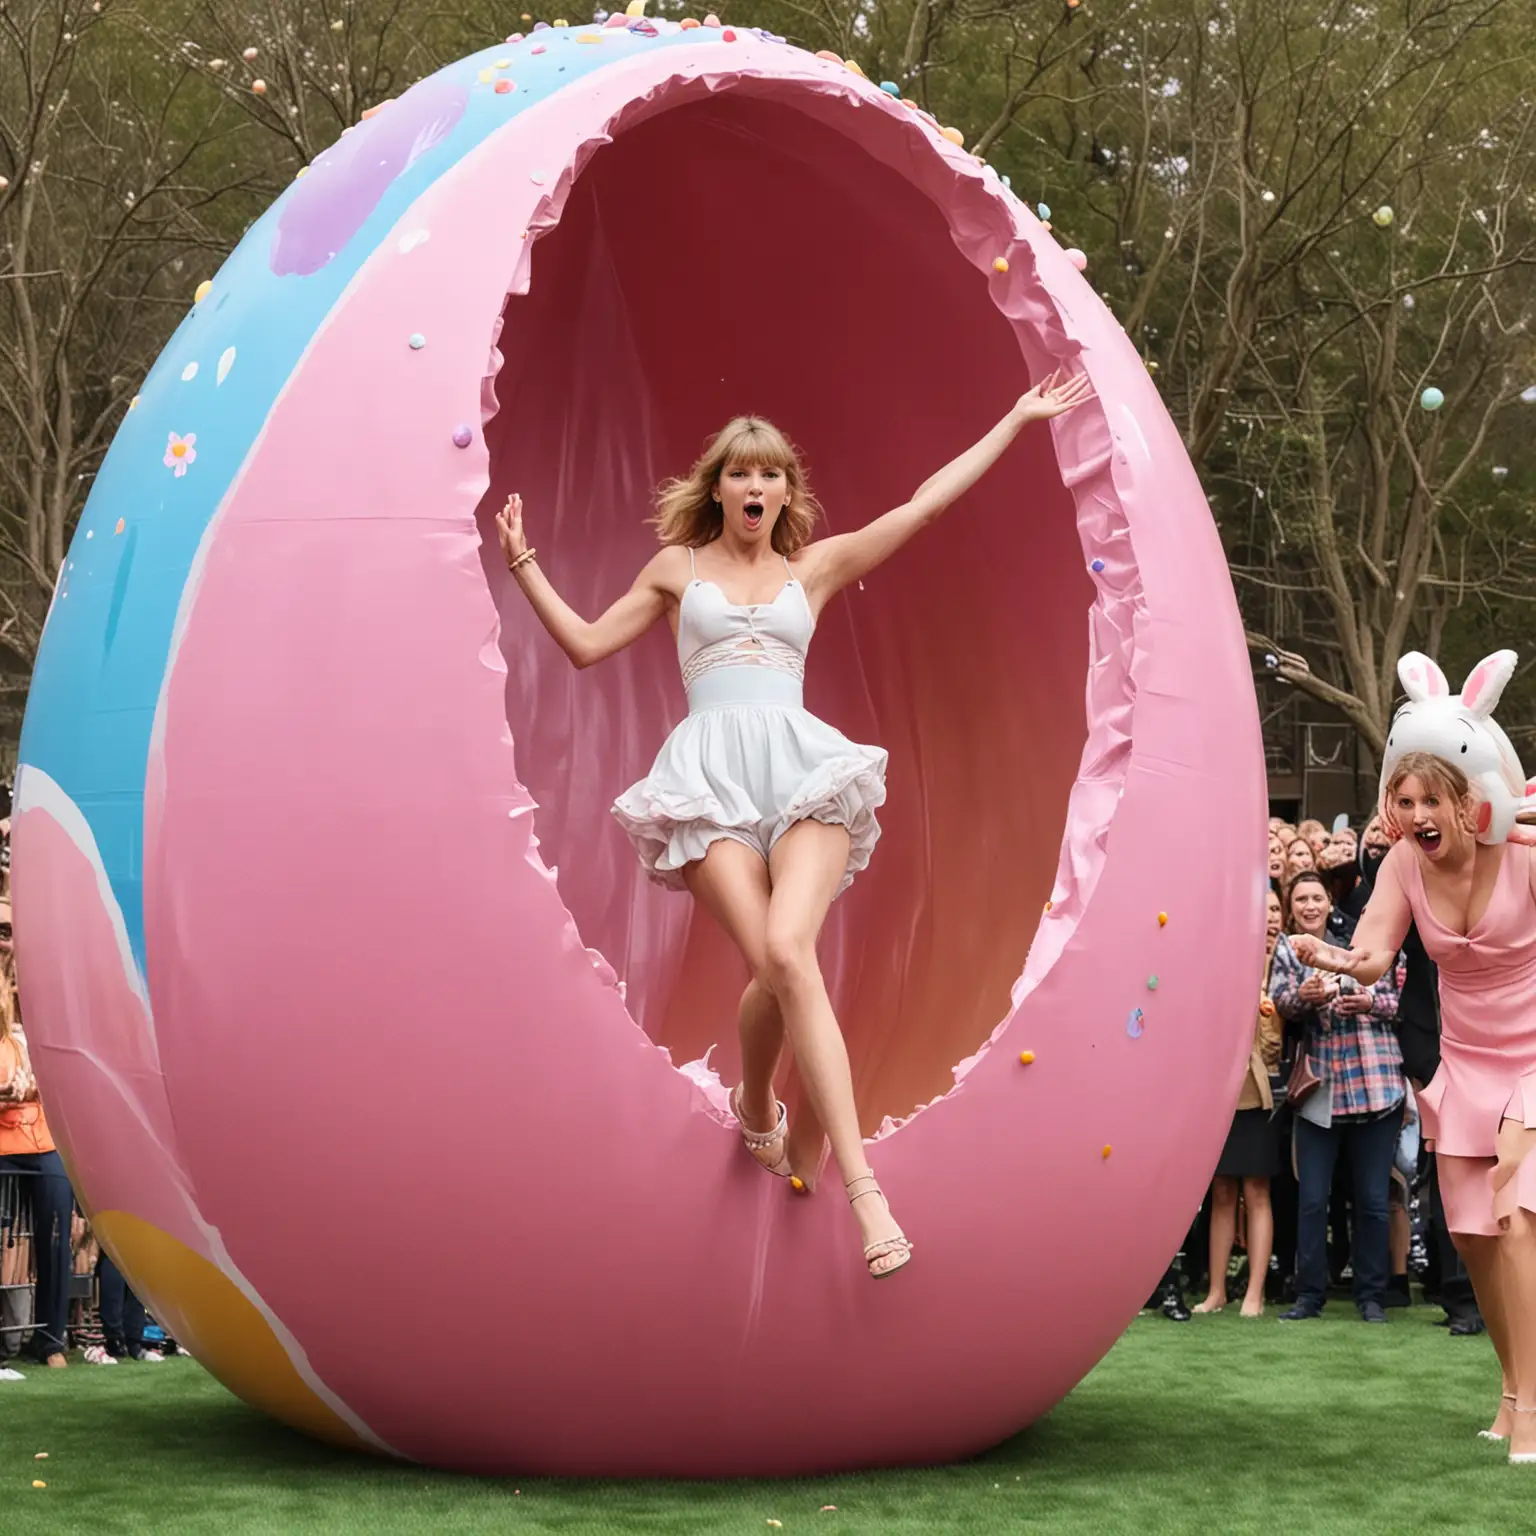 Taylor Swift Surprises from Giant Easter Egg